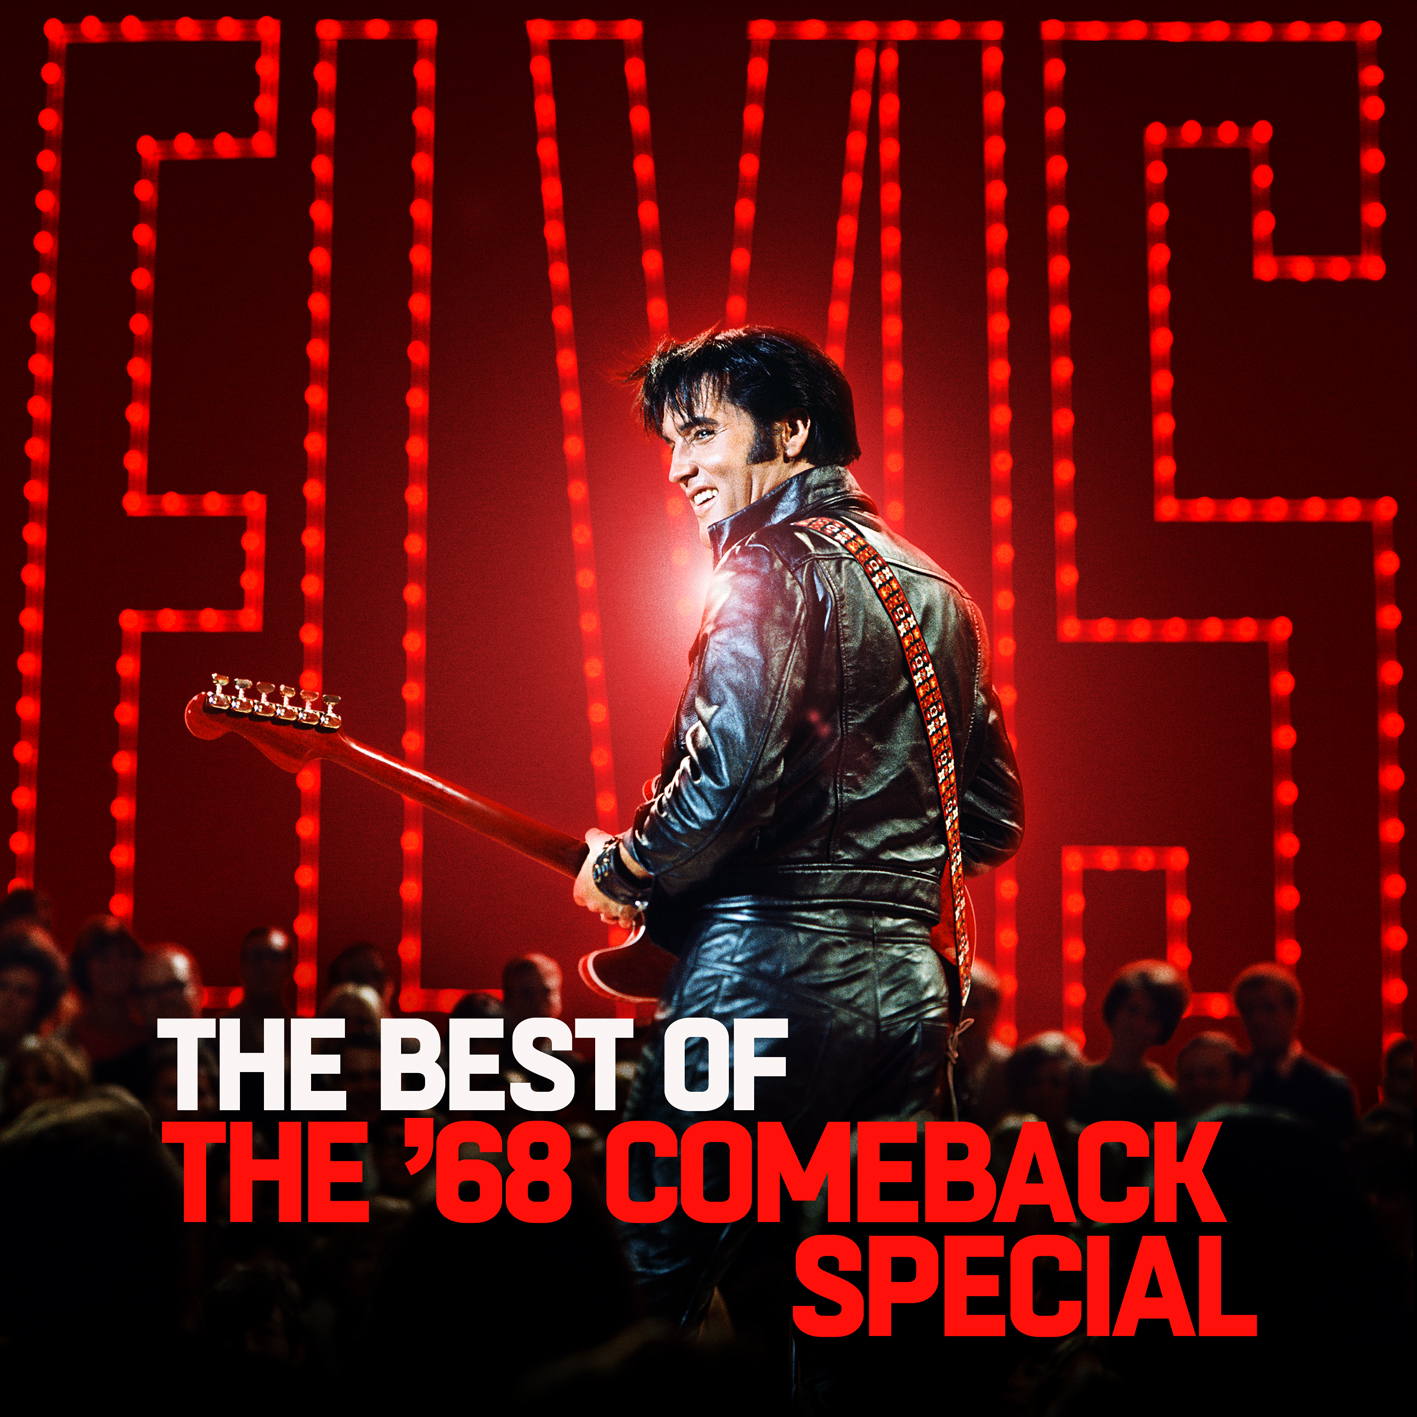 Elvis Presley - “The Best Of The ’68 Comeback Special” (RCA/Sony Music) 